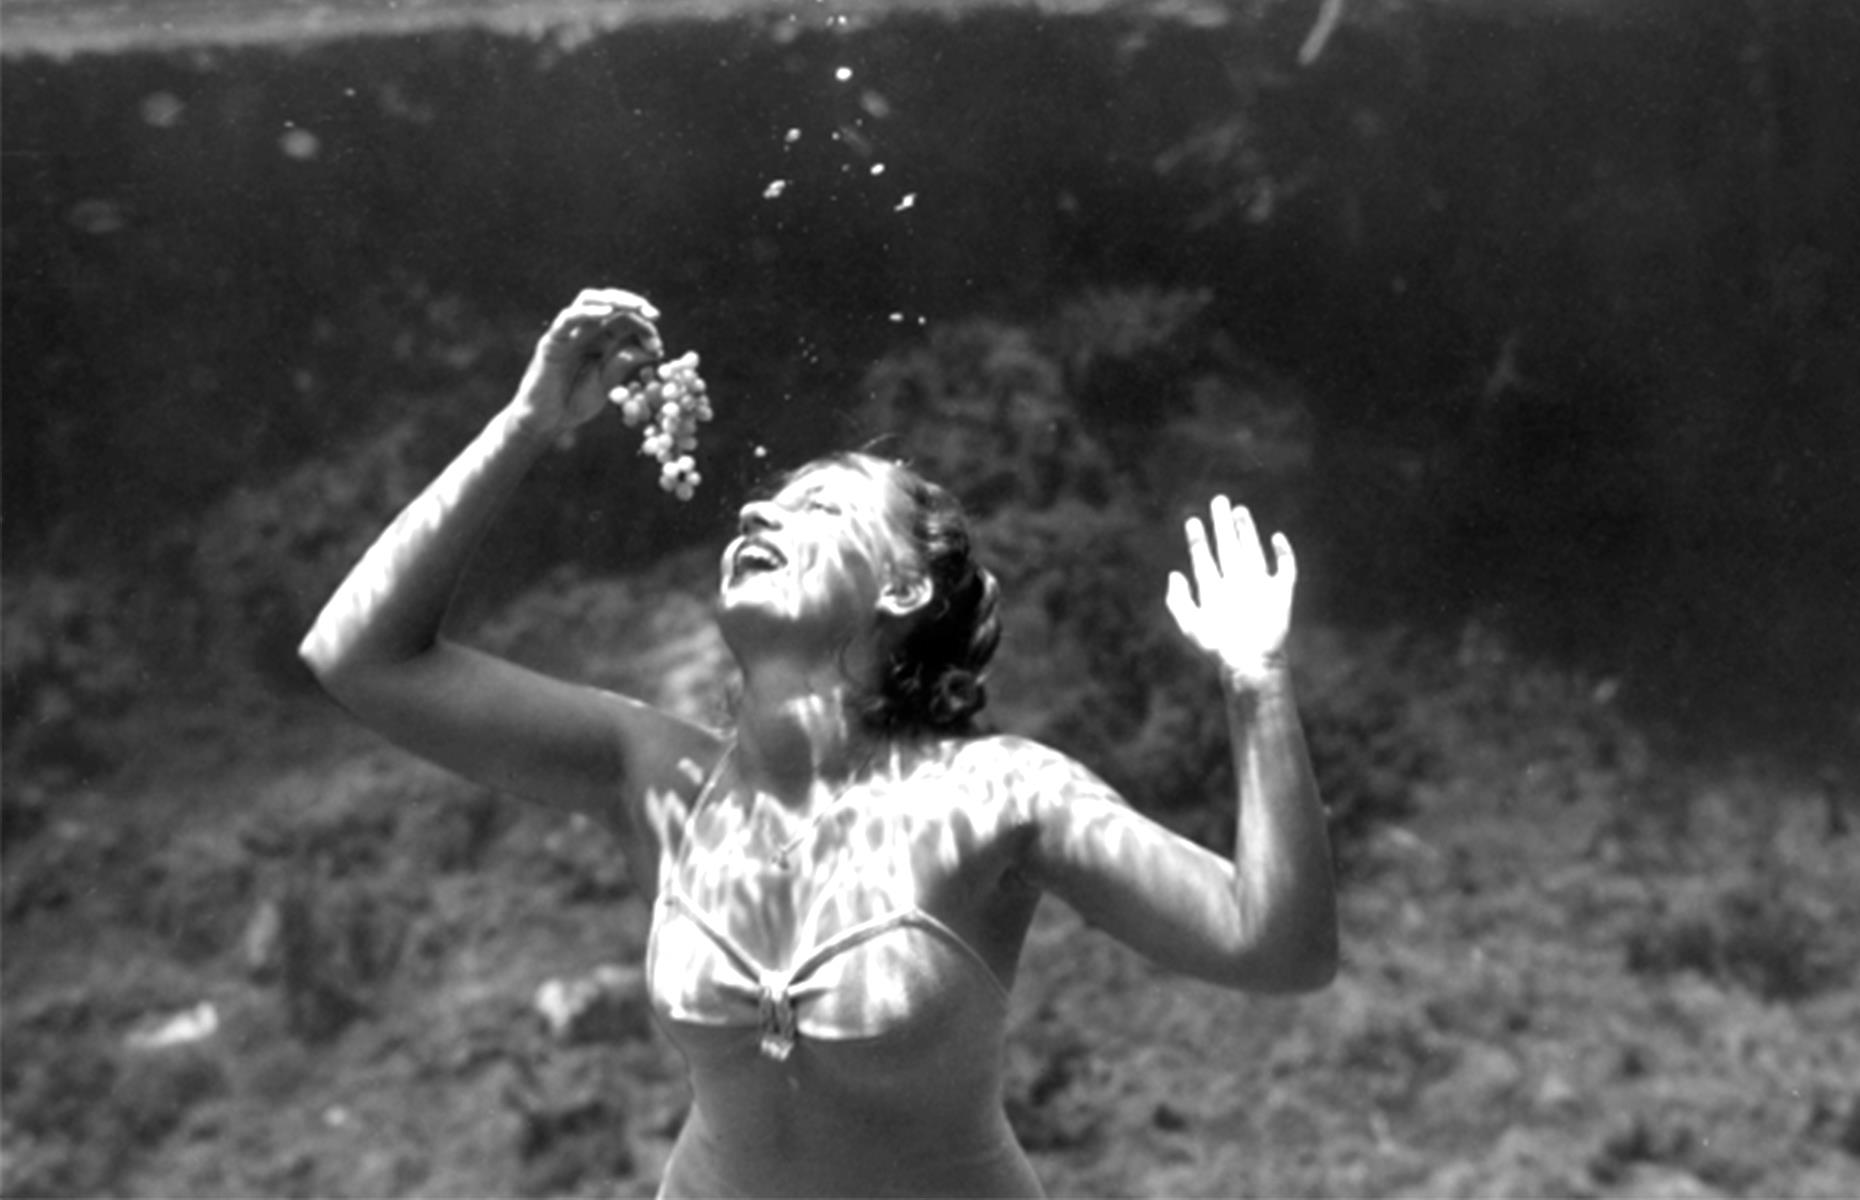 Another popular Sunshine State attraction was born in the 1940s. In this decade, Newton Perry built an underwater theater at Weeki Wachee Spring, western Florida, and trained women to perform synchronized routines some six feet (1.8m) below the water's surface, using special hoses to breathe. The show was an instant hit and vacationers traveled from around the country to see the "mermaids" for themselves. This photo dates to 1949.